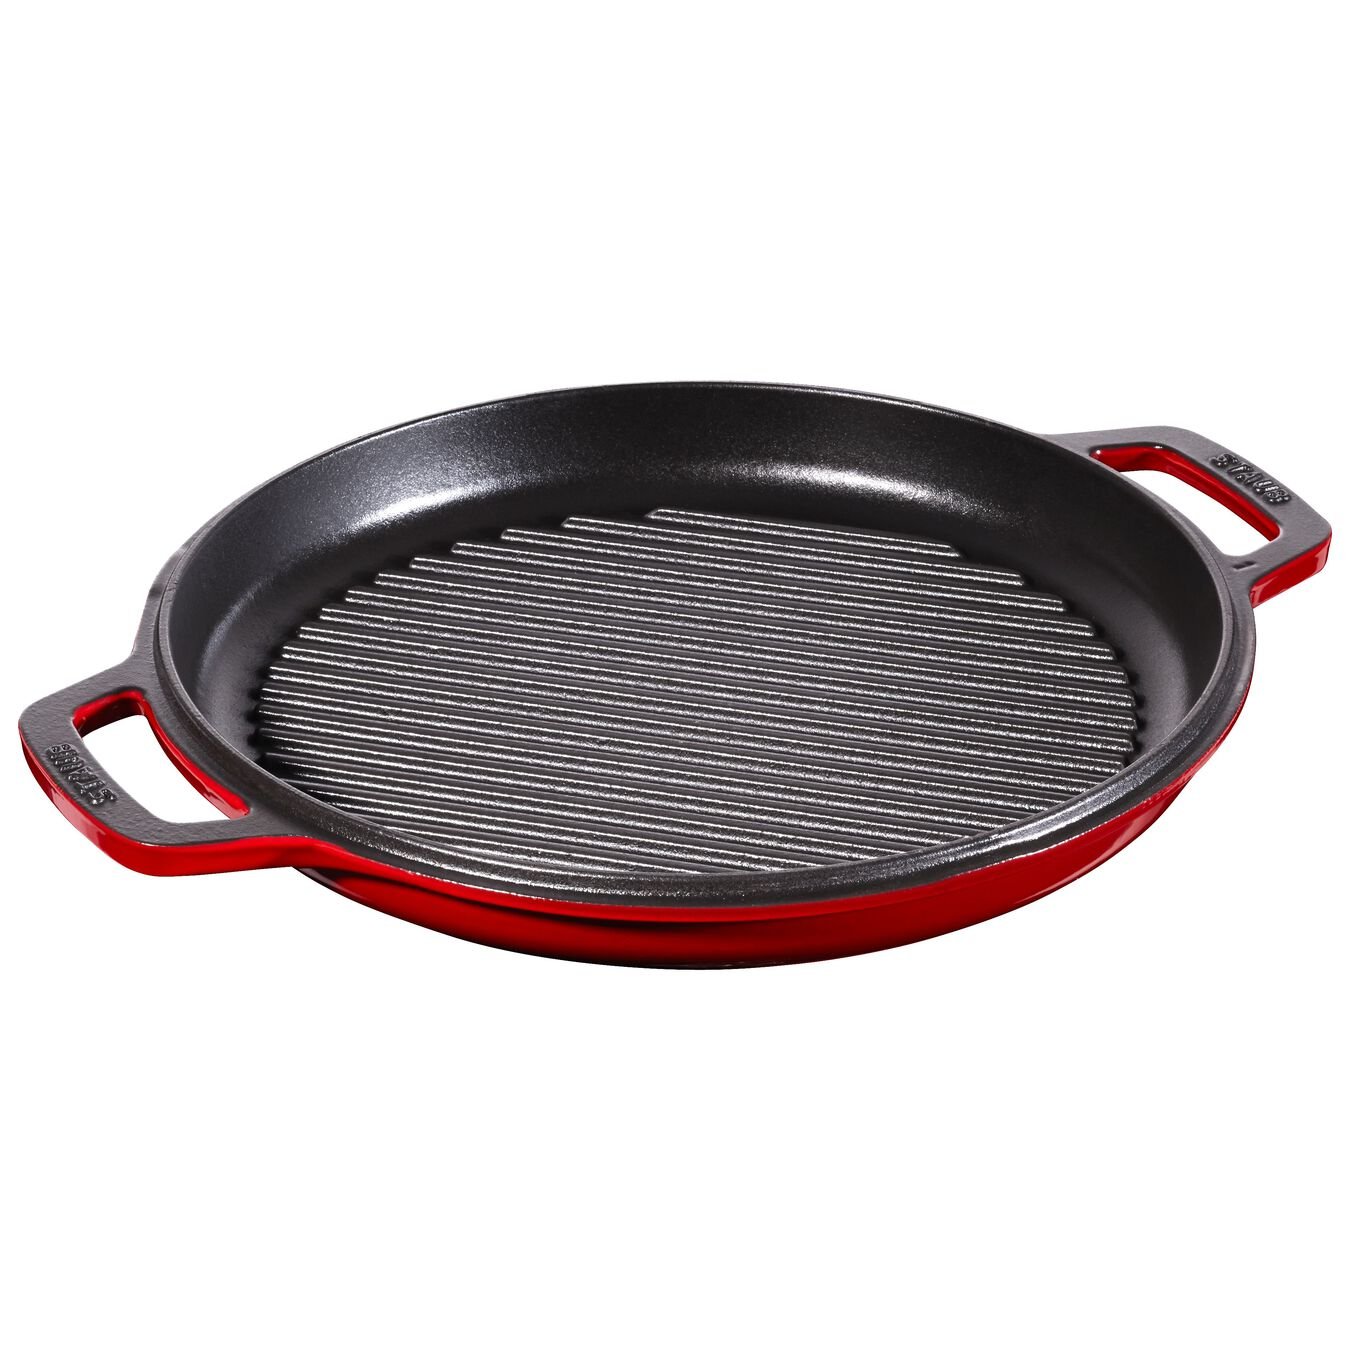 6 l cast iron round Braise + Grill, cherry - Visual Imperfections,,large 2